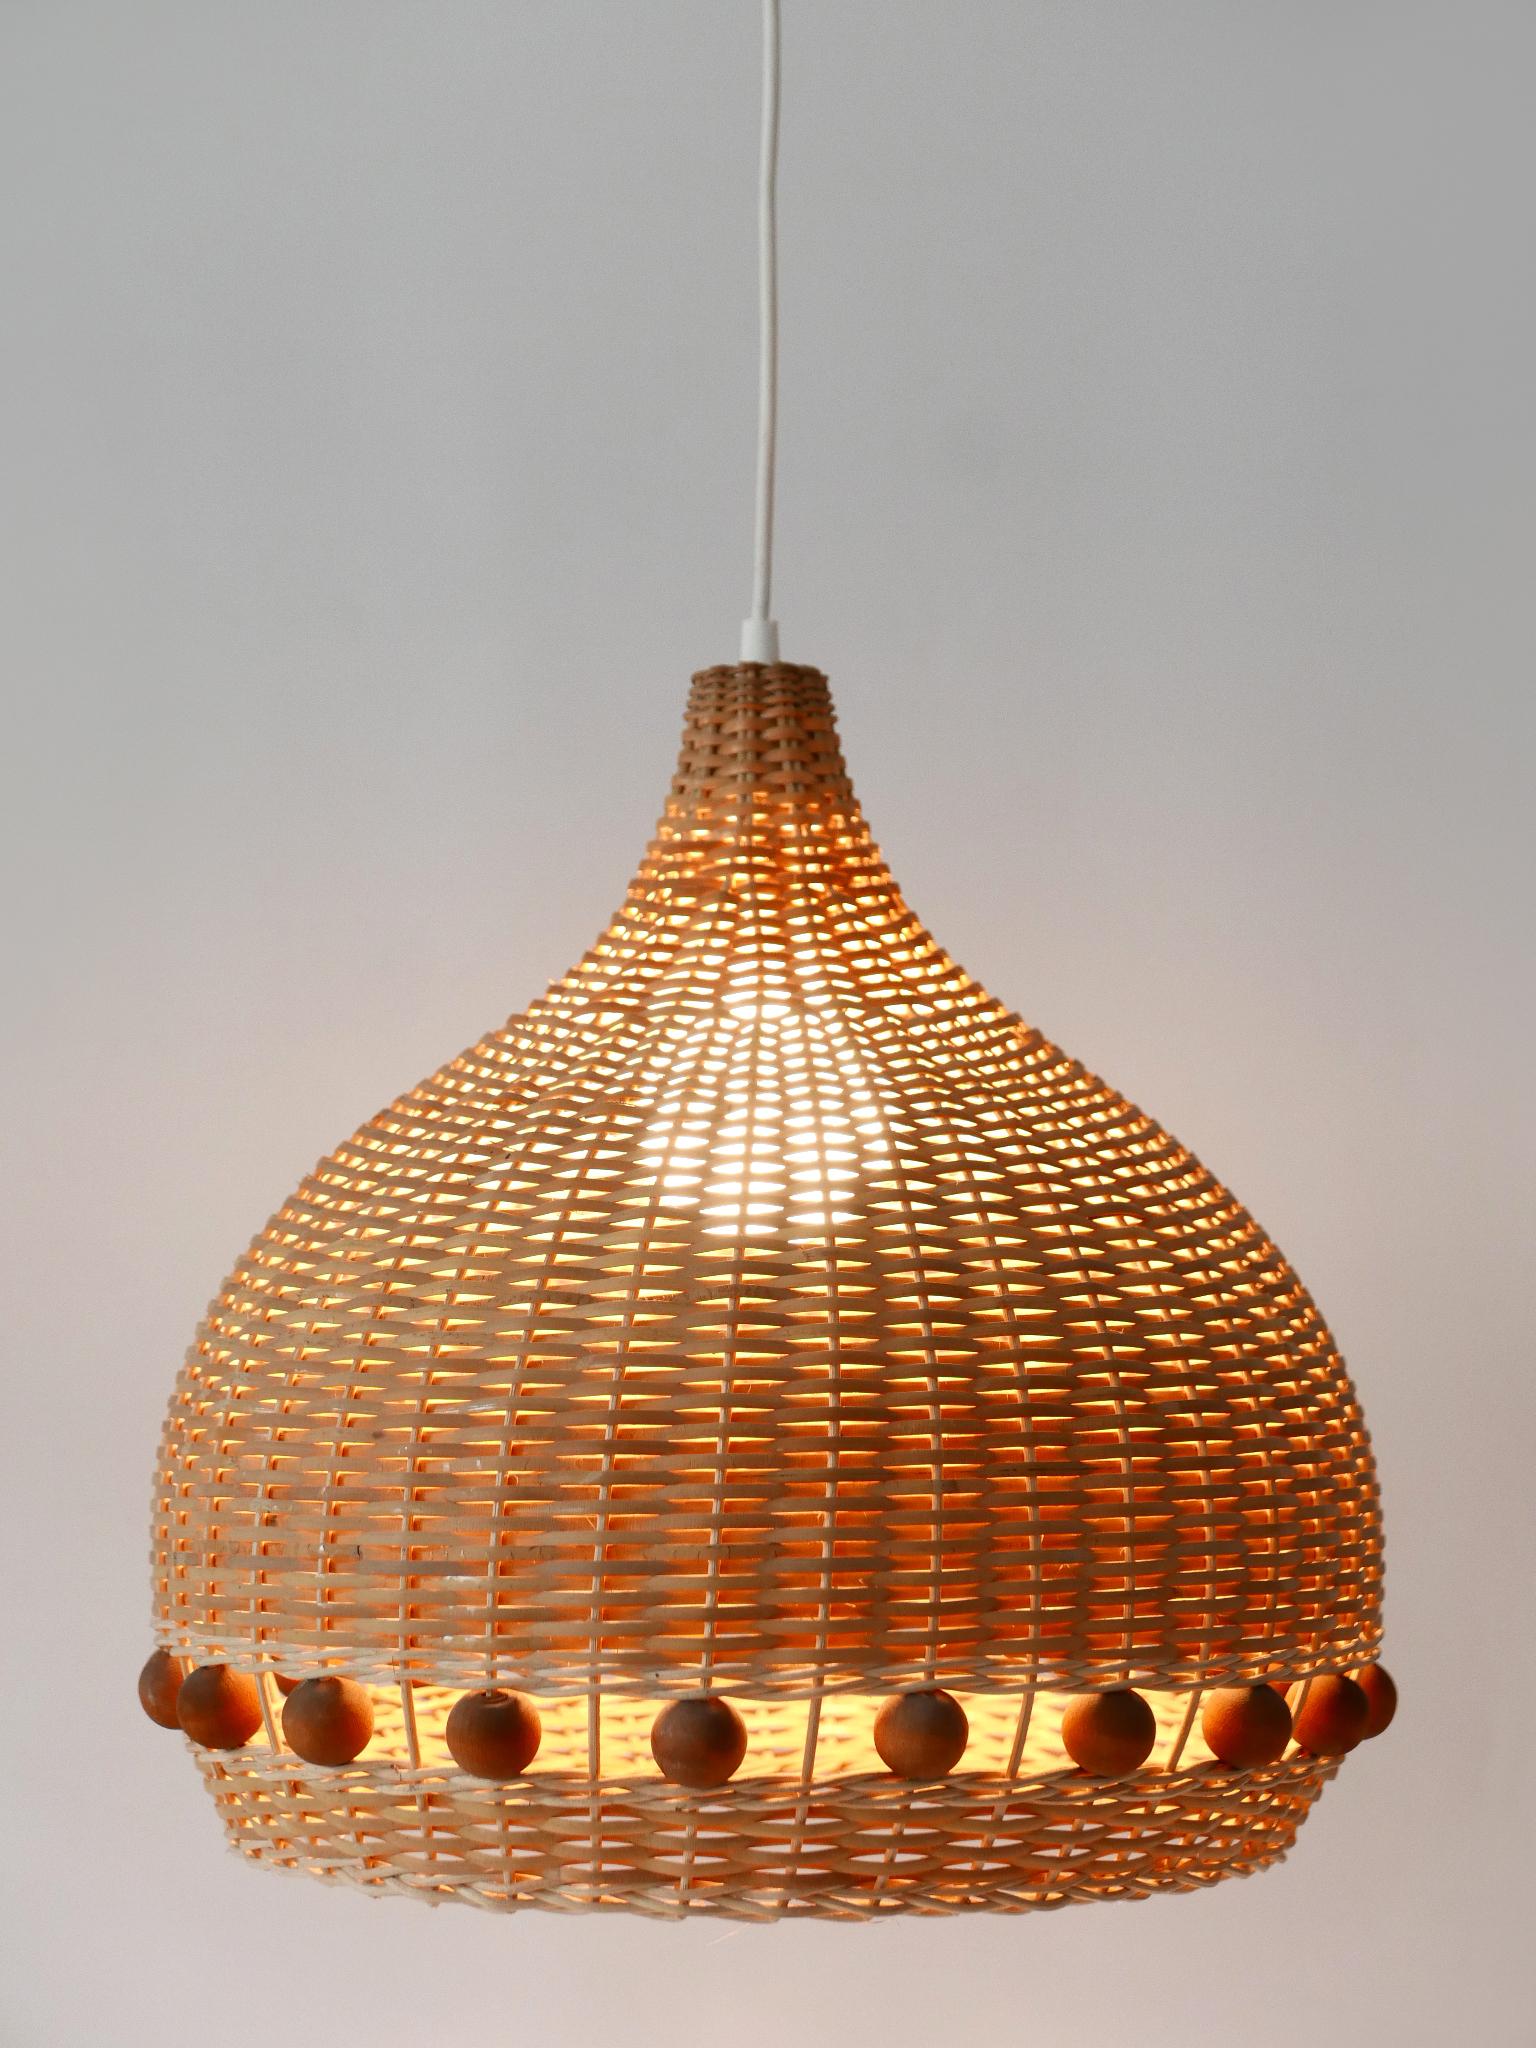 Mid-20th Century Mid-Century Modern Rattan Tulip Pendant Lamps or Hanging Lights Germany 1960s For Sale